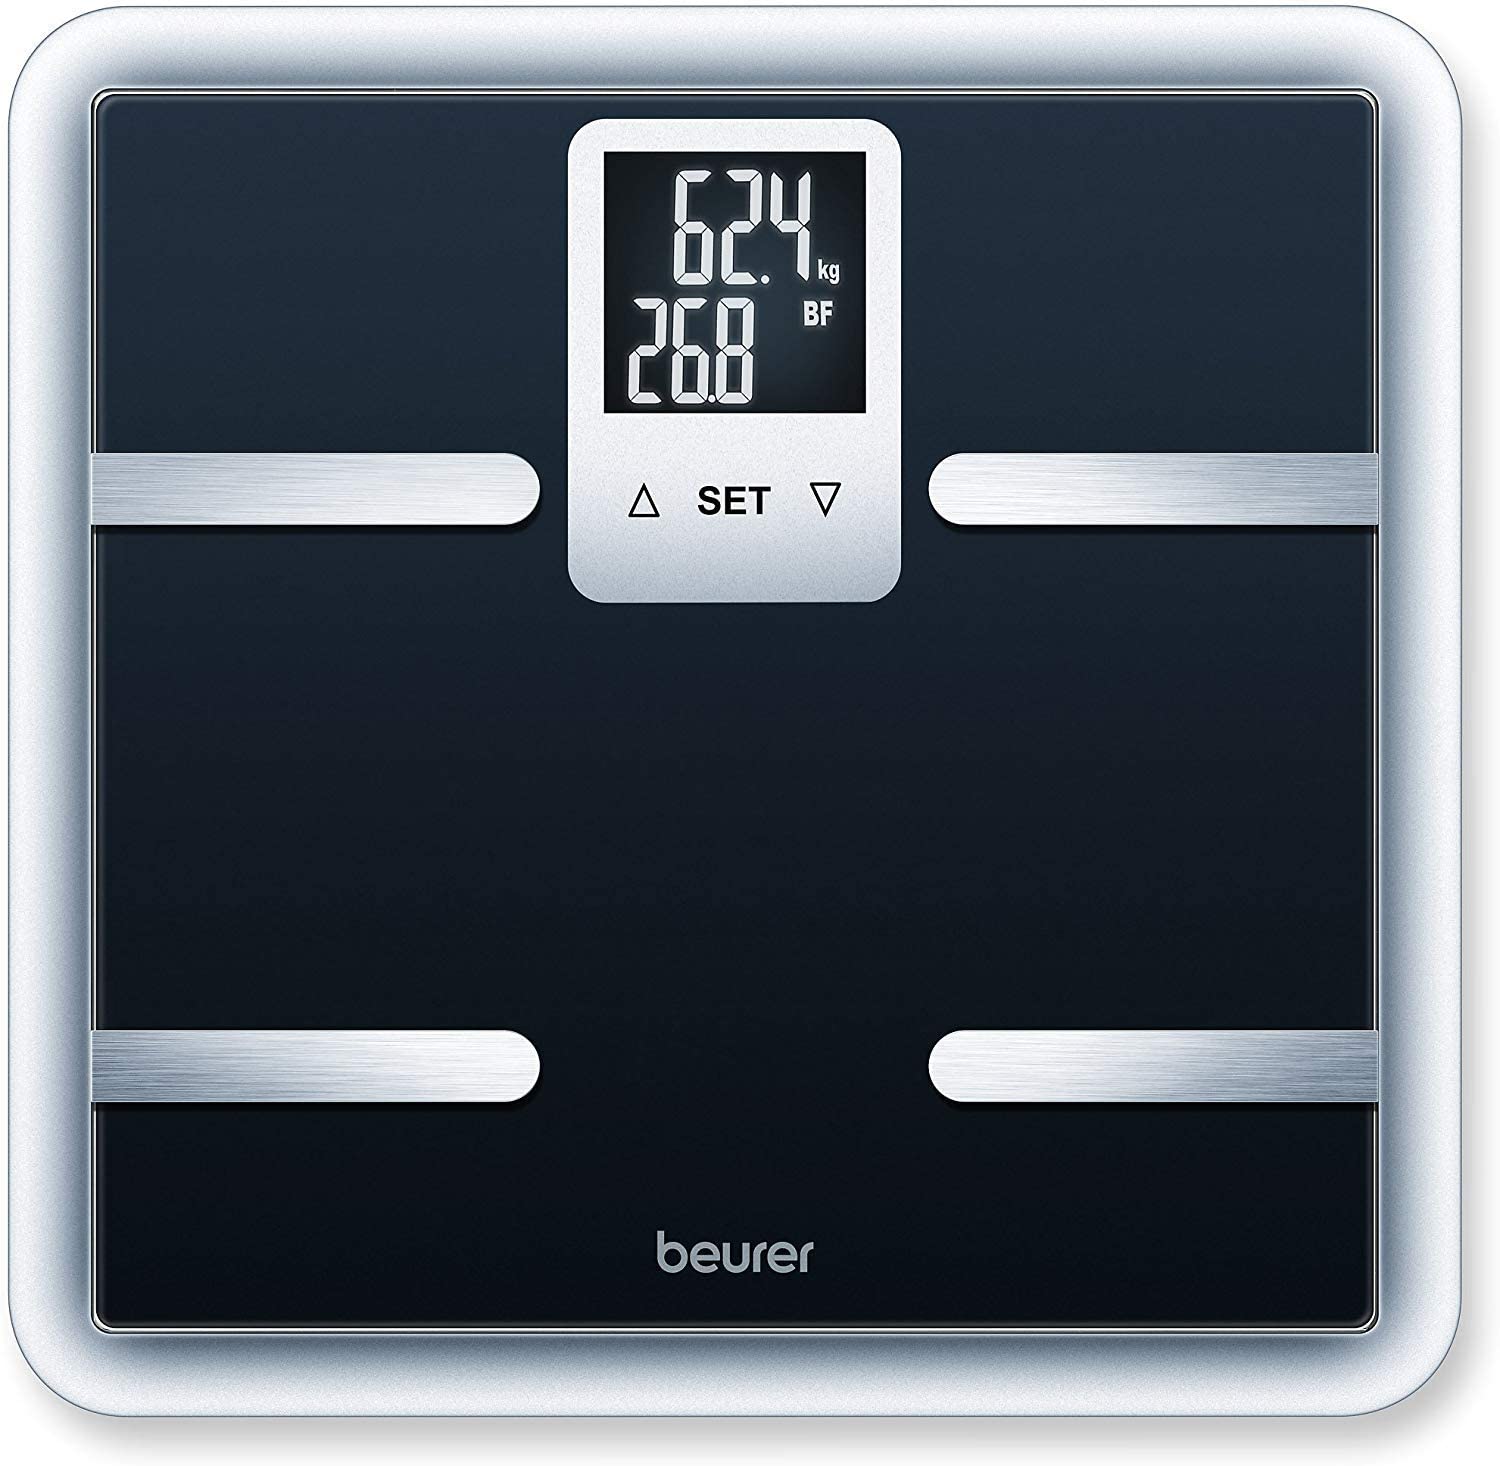 Beurer BG 40 Digital Body Analysis Scales Safety Glass Body Fat Measurement Calorie Display